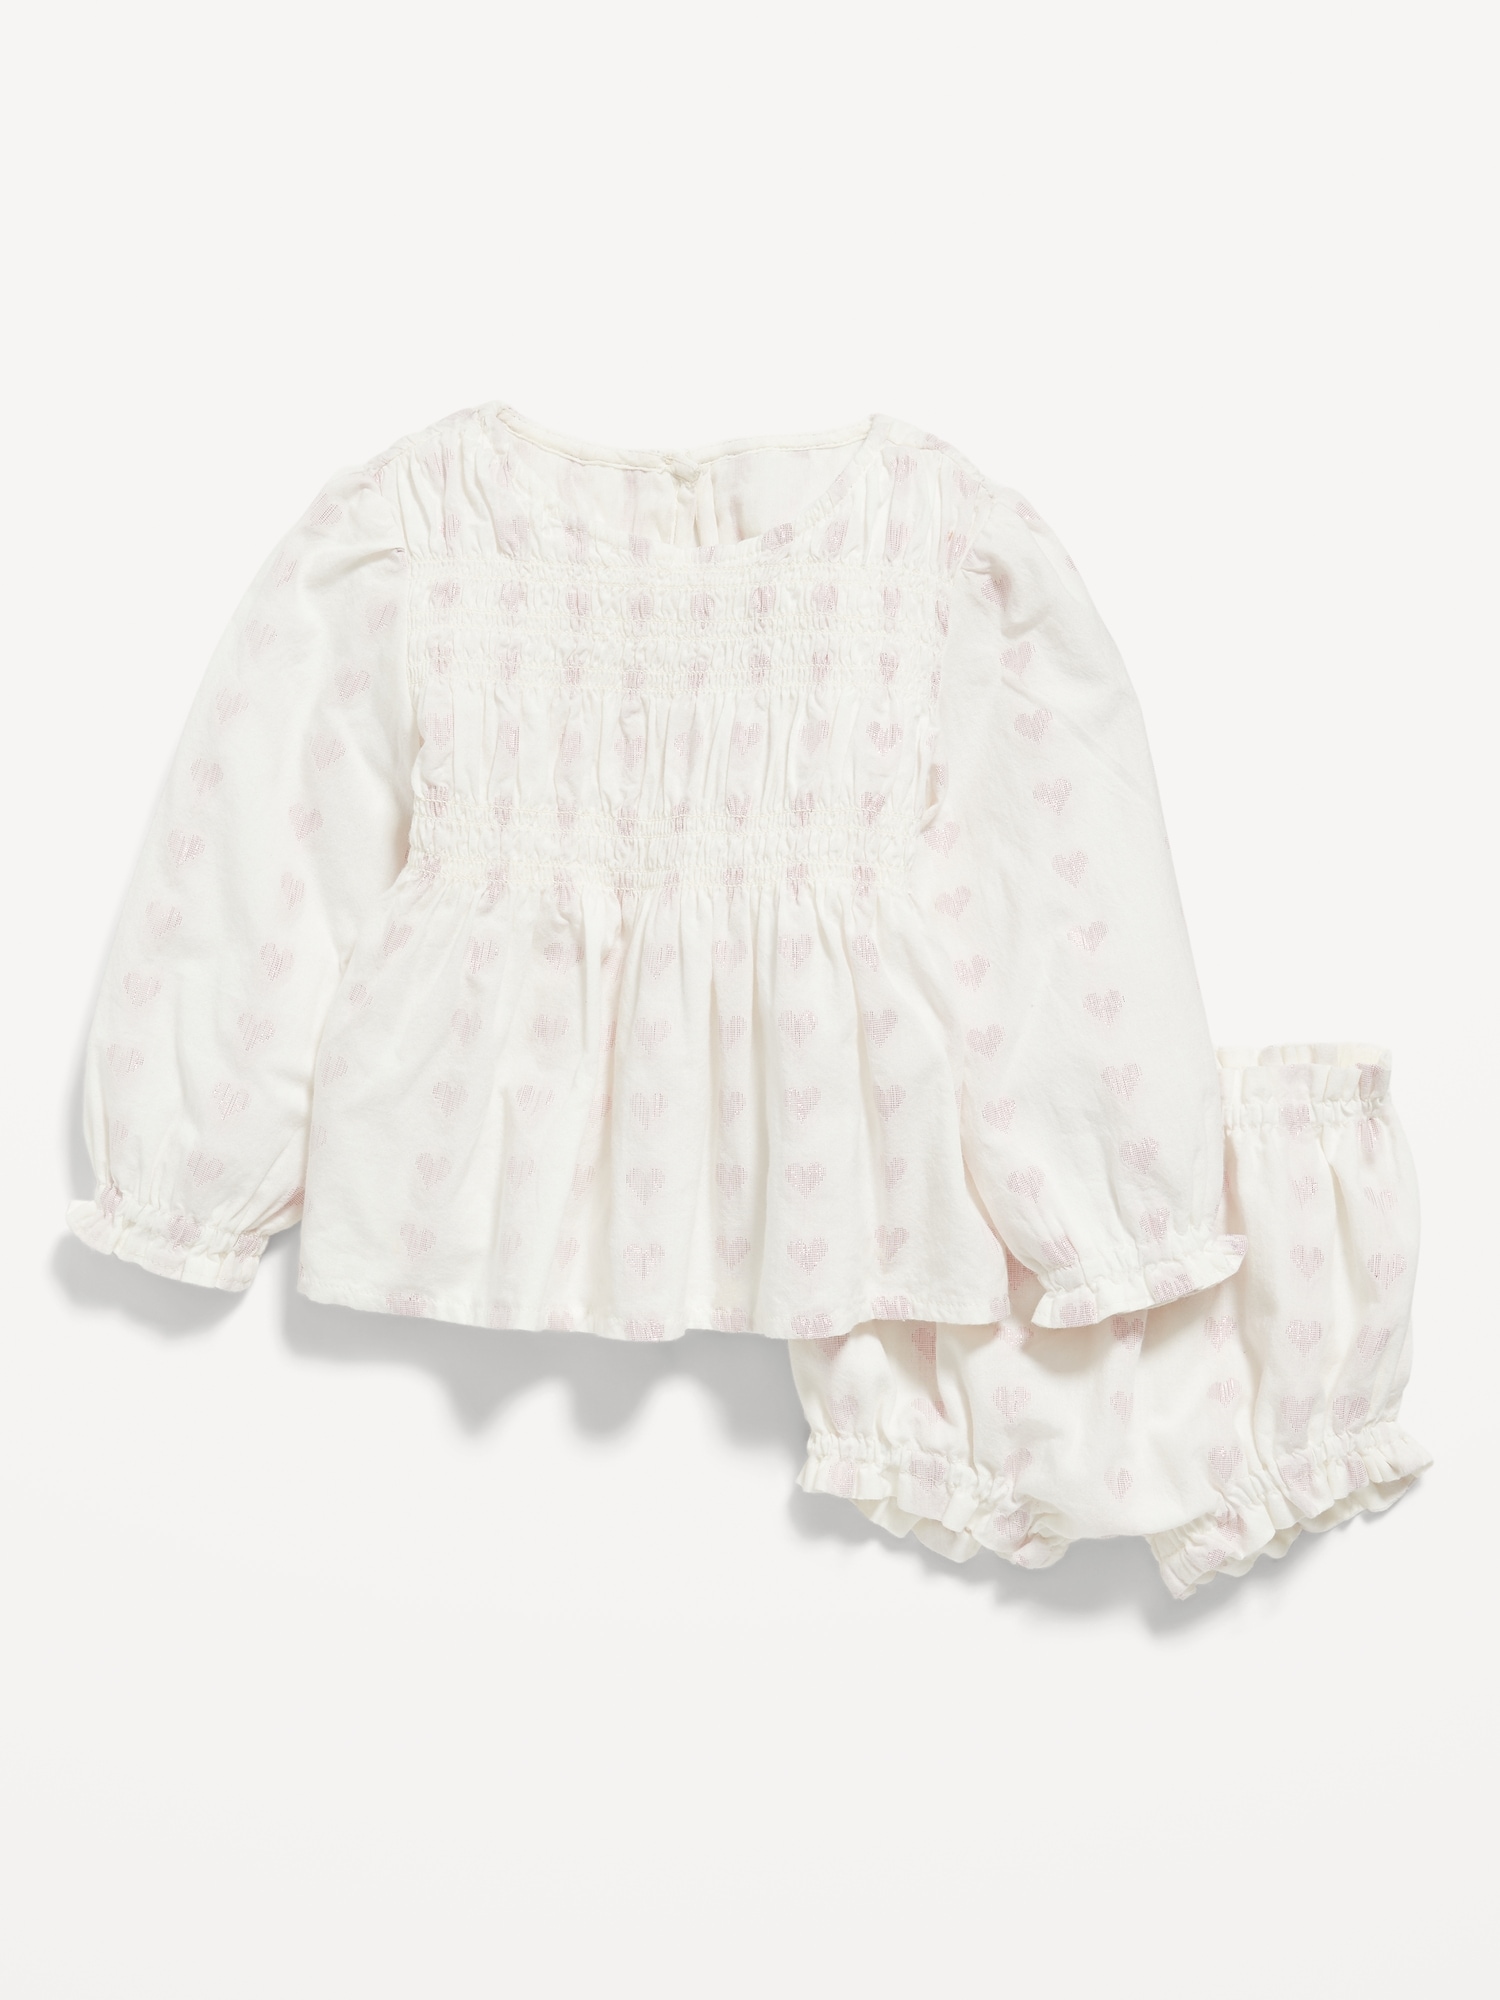 Long-Sleeve Heart-Print Top and Bloomer Shorts Set for Baby